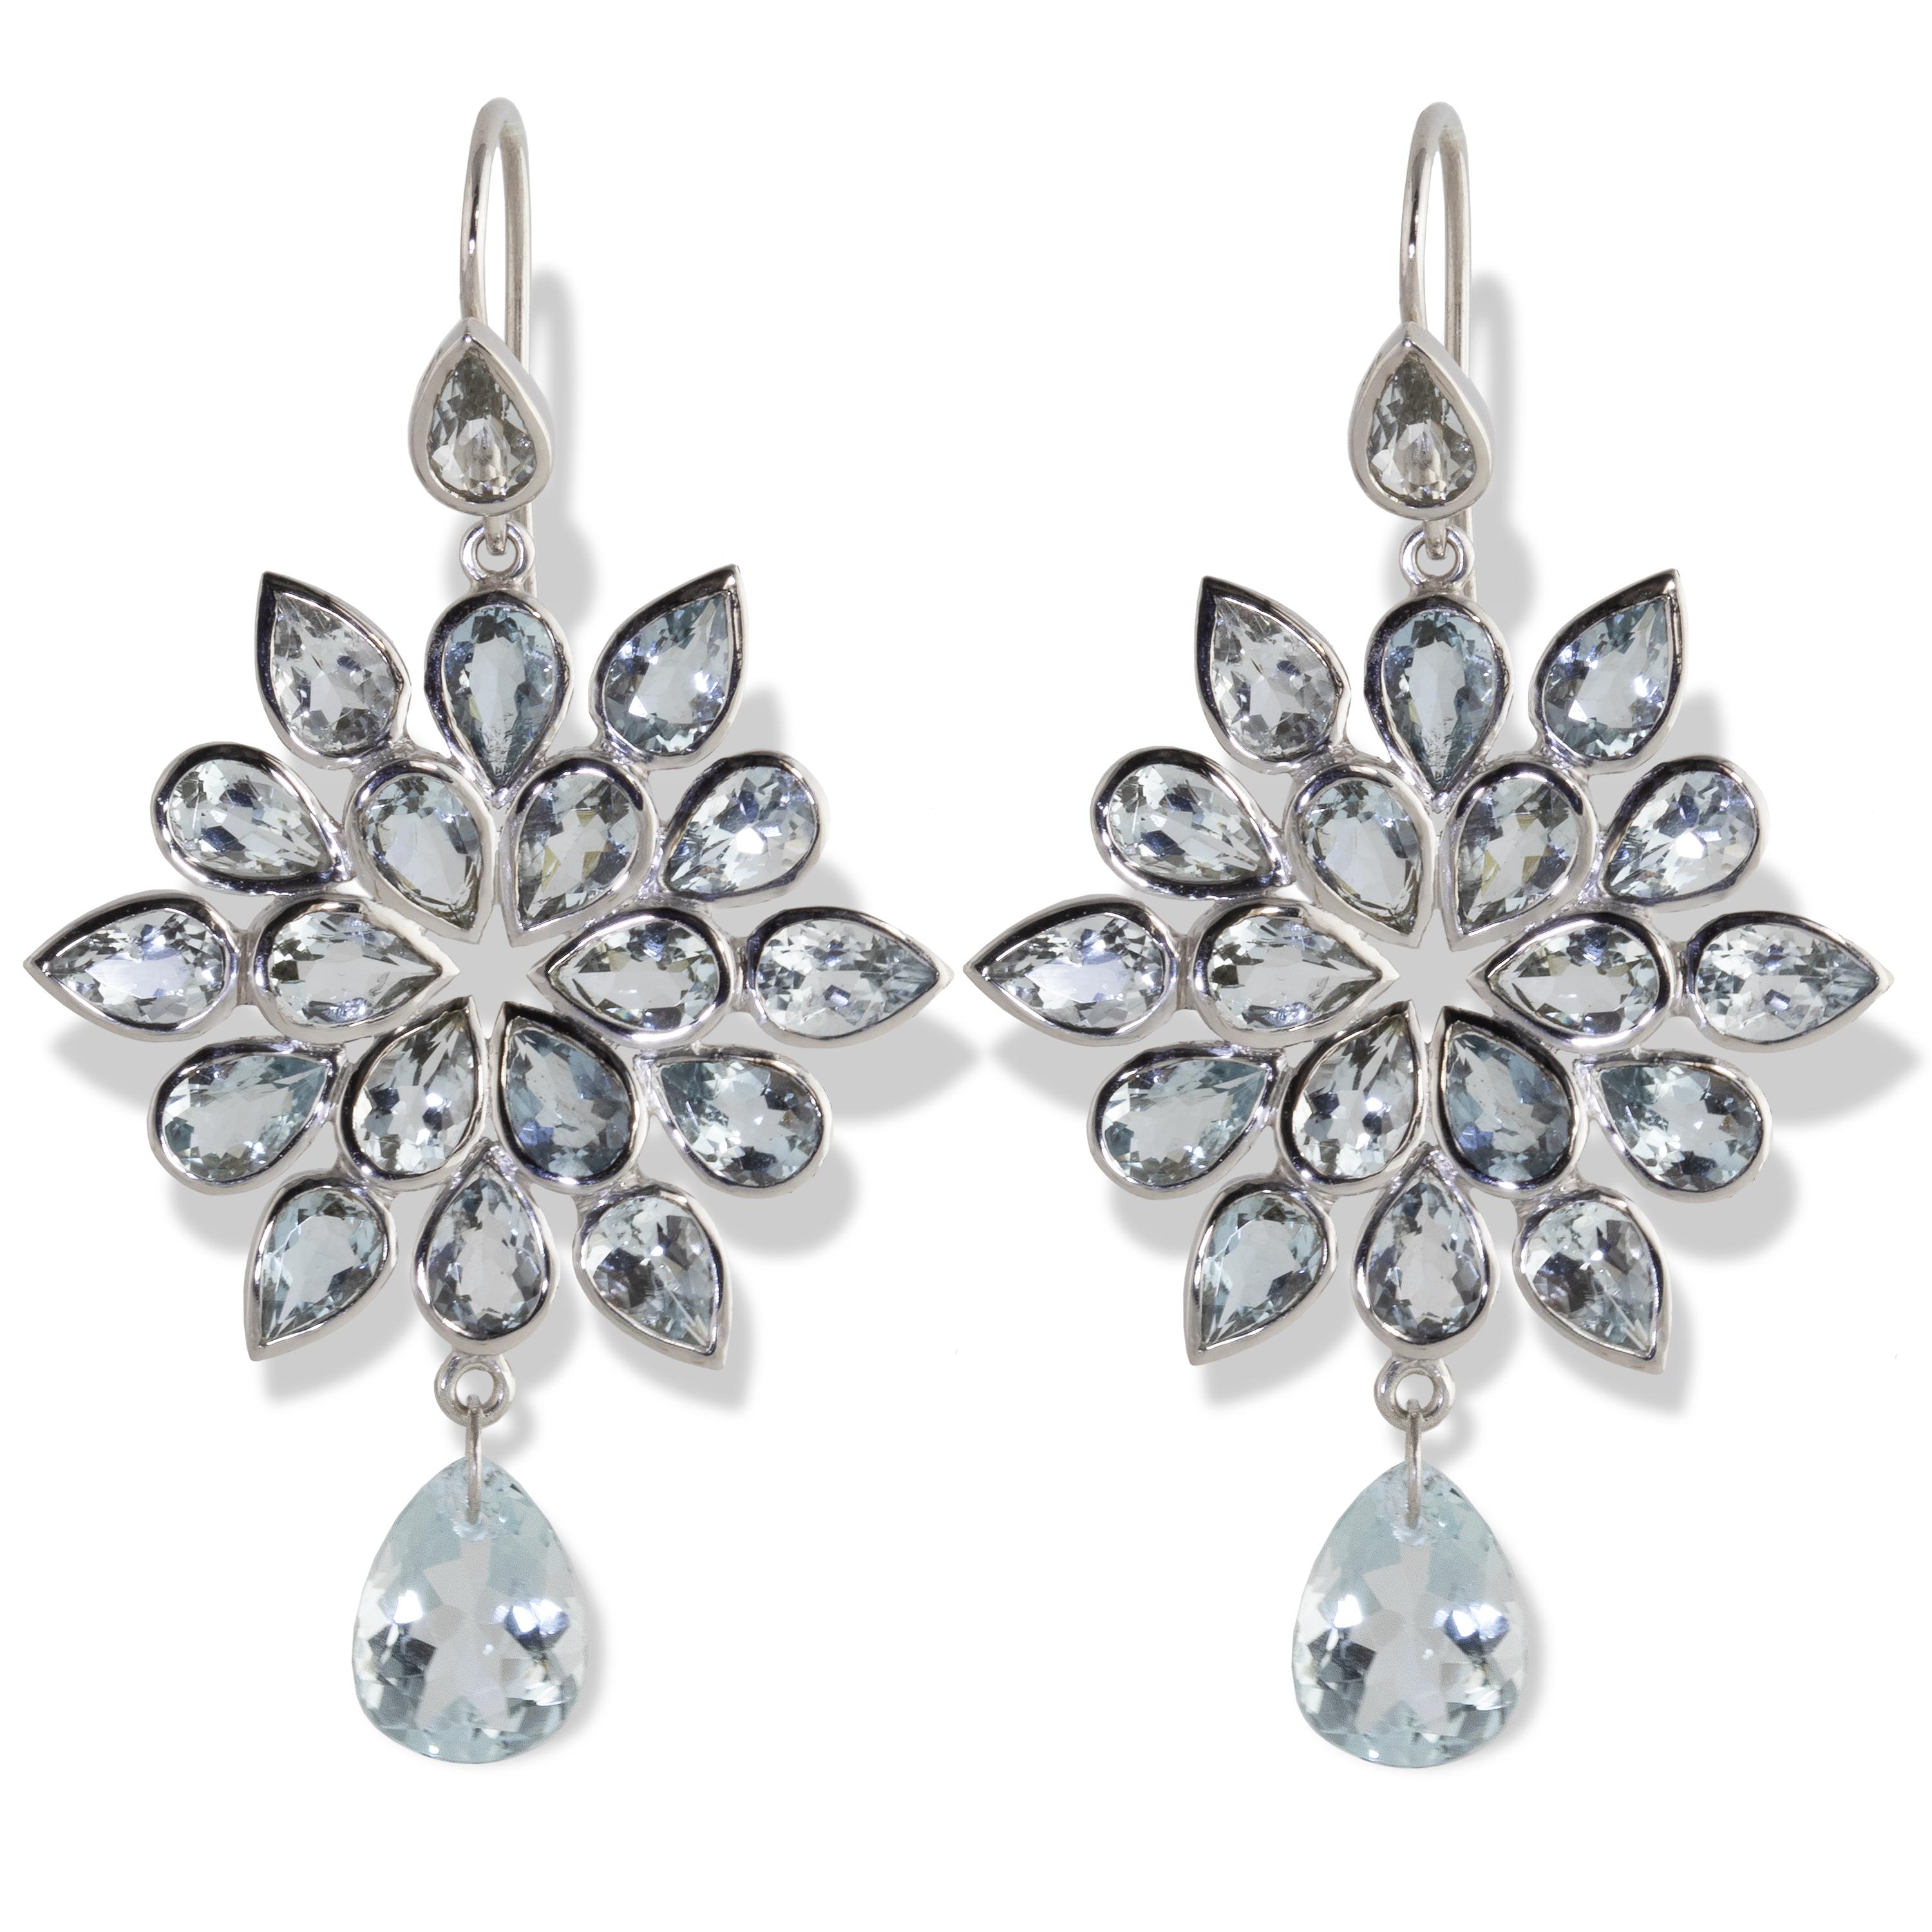 Spectacular Aquamarine ‘Ocean Flower’ Chandelier Earrings. 14.25 carats of glamorous and dramatic Brazilian Aquamarine pear-shaped gems form a layered flower shape with an aquamarine drop at the bottom. Set in 18k white gold.  

Ancient sailors